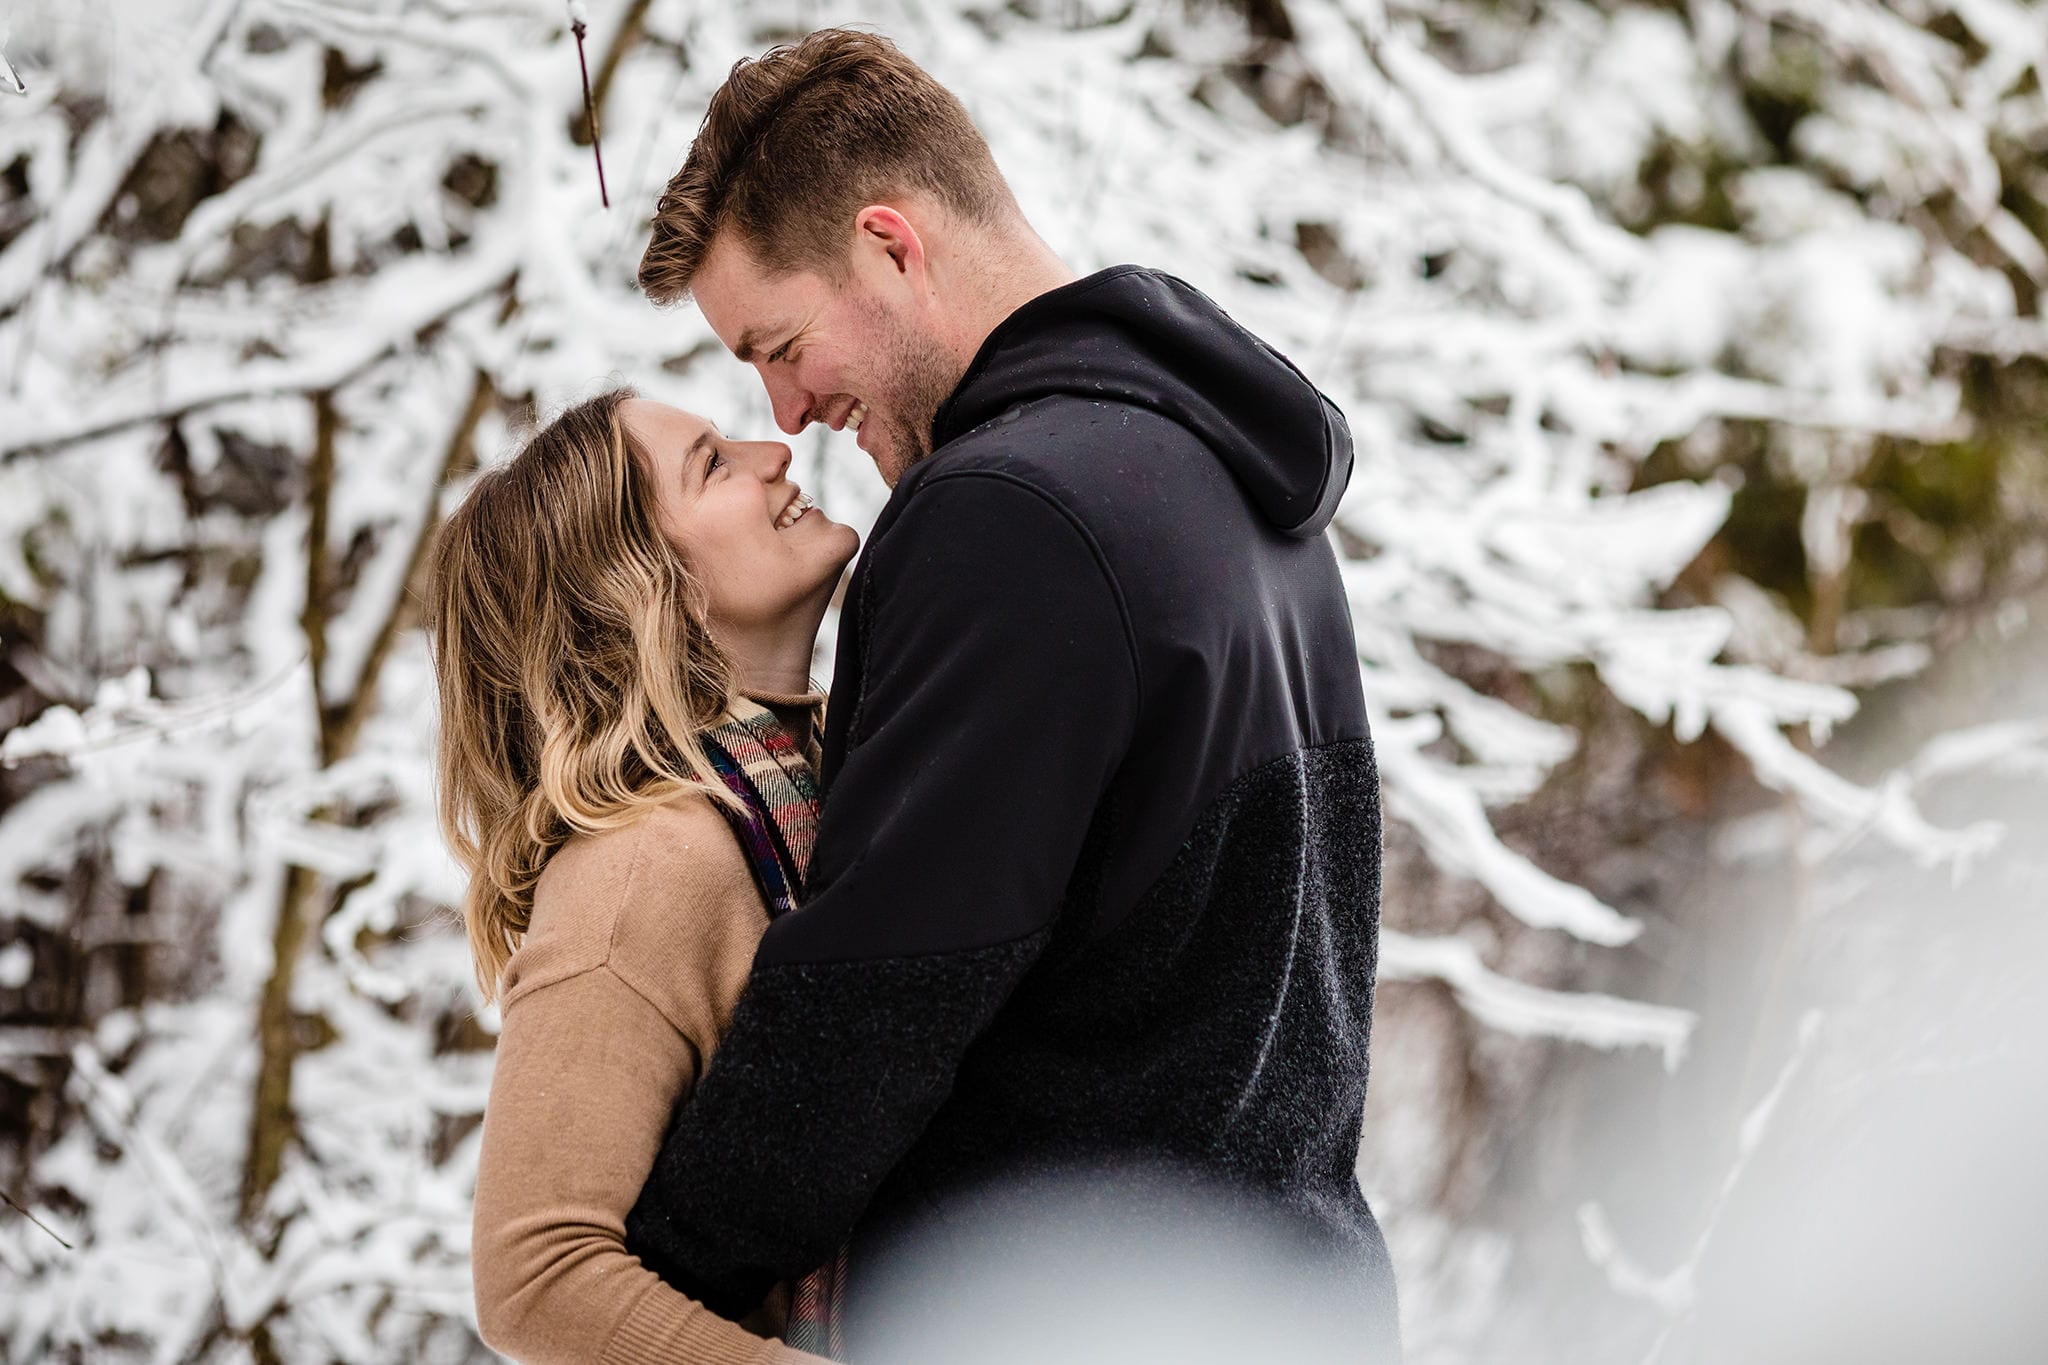 man and woman stand close together while making eye contact in front of snowy trees